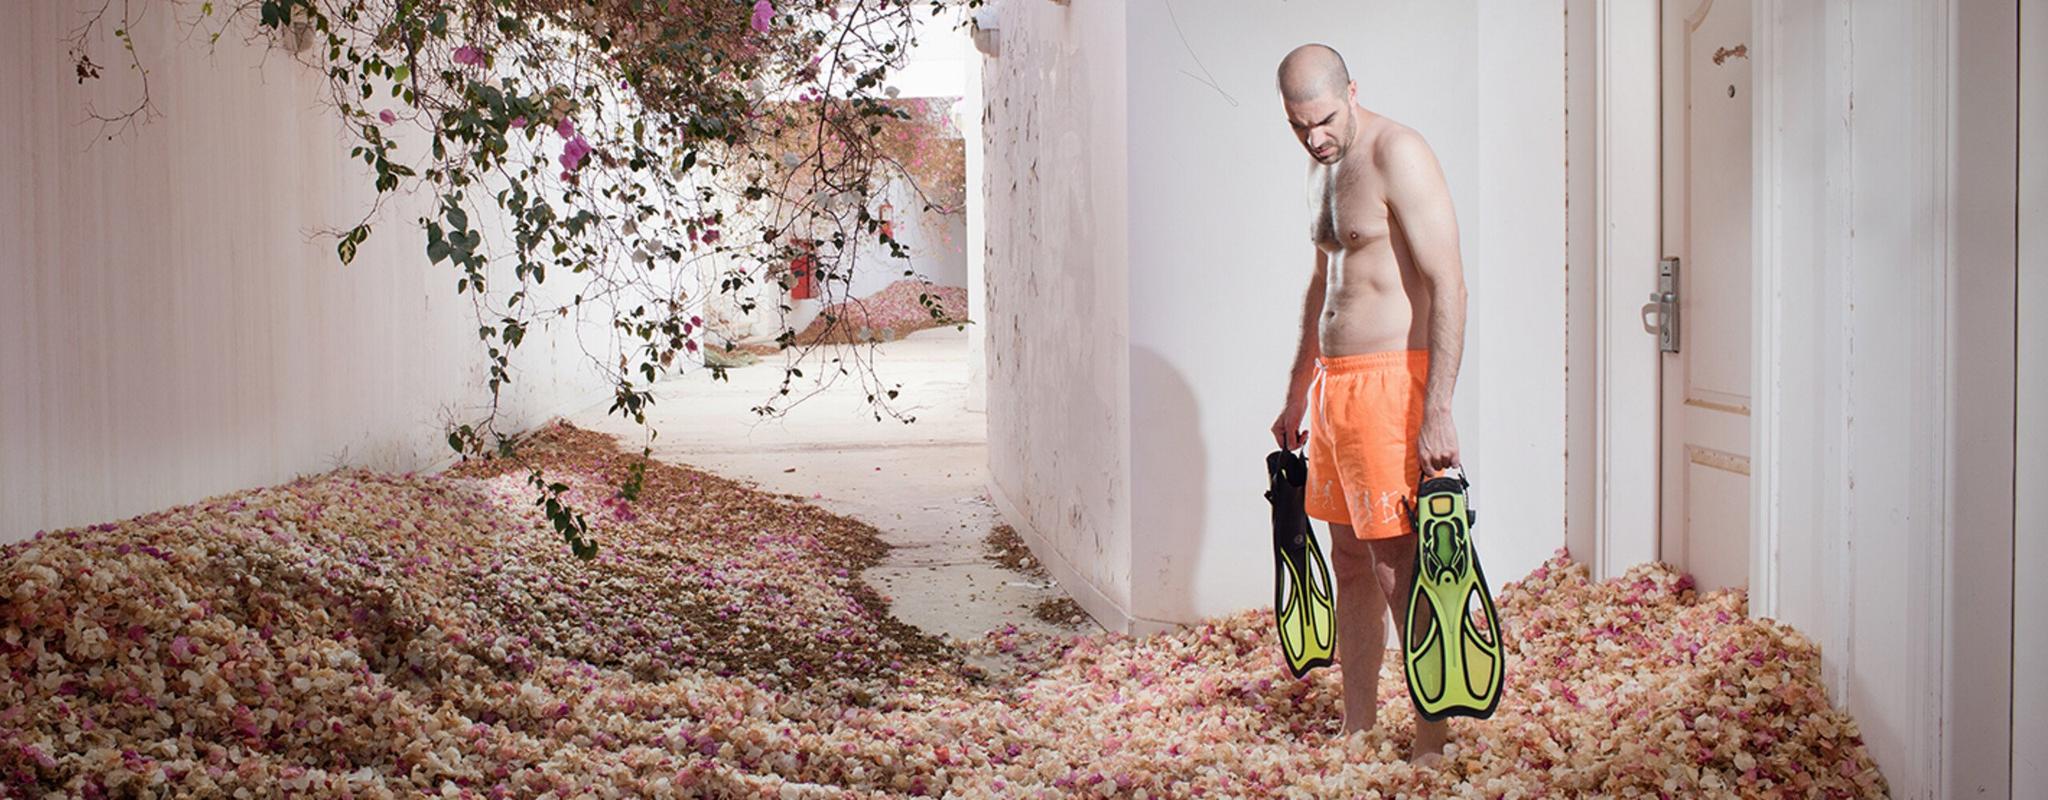 A man holding two flippers stands in a hotel room overgrown with rose bushes